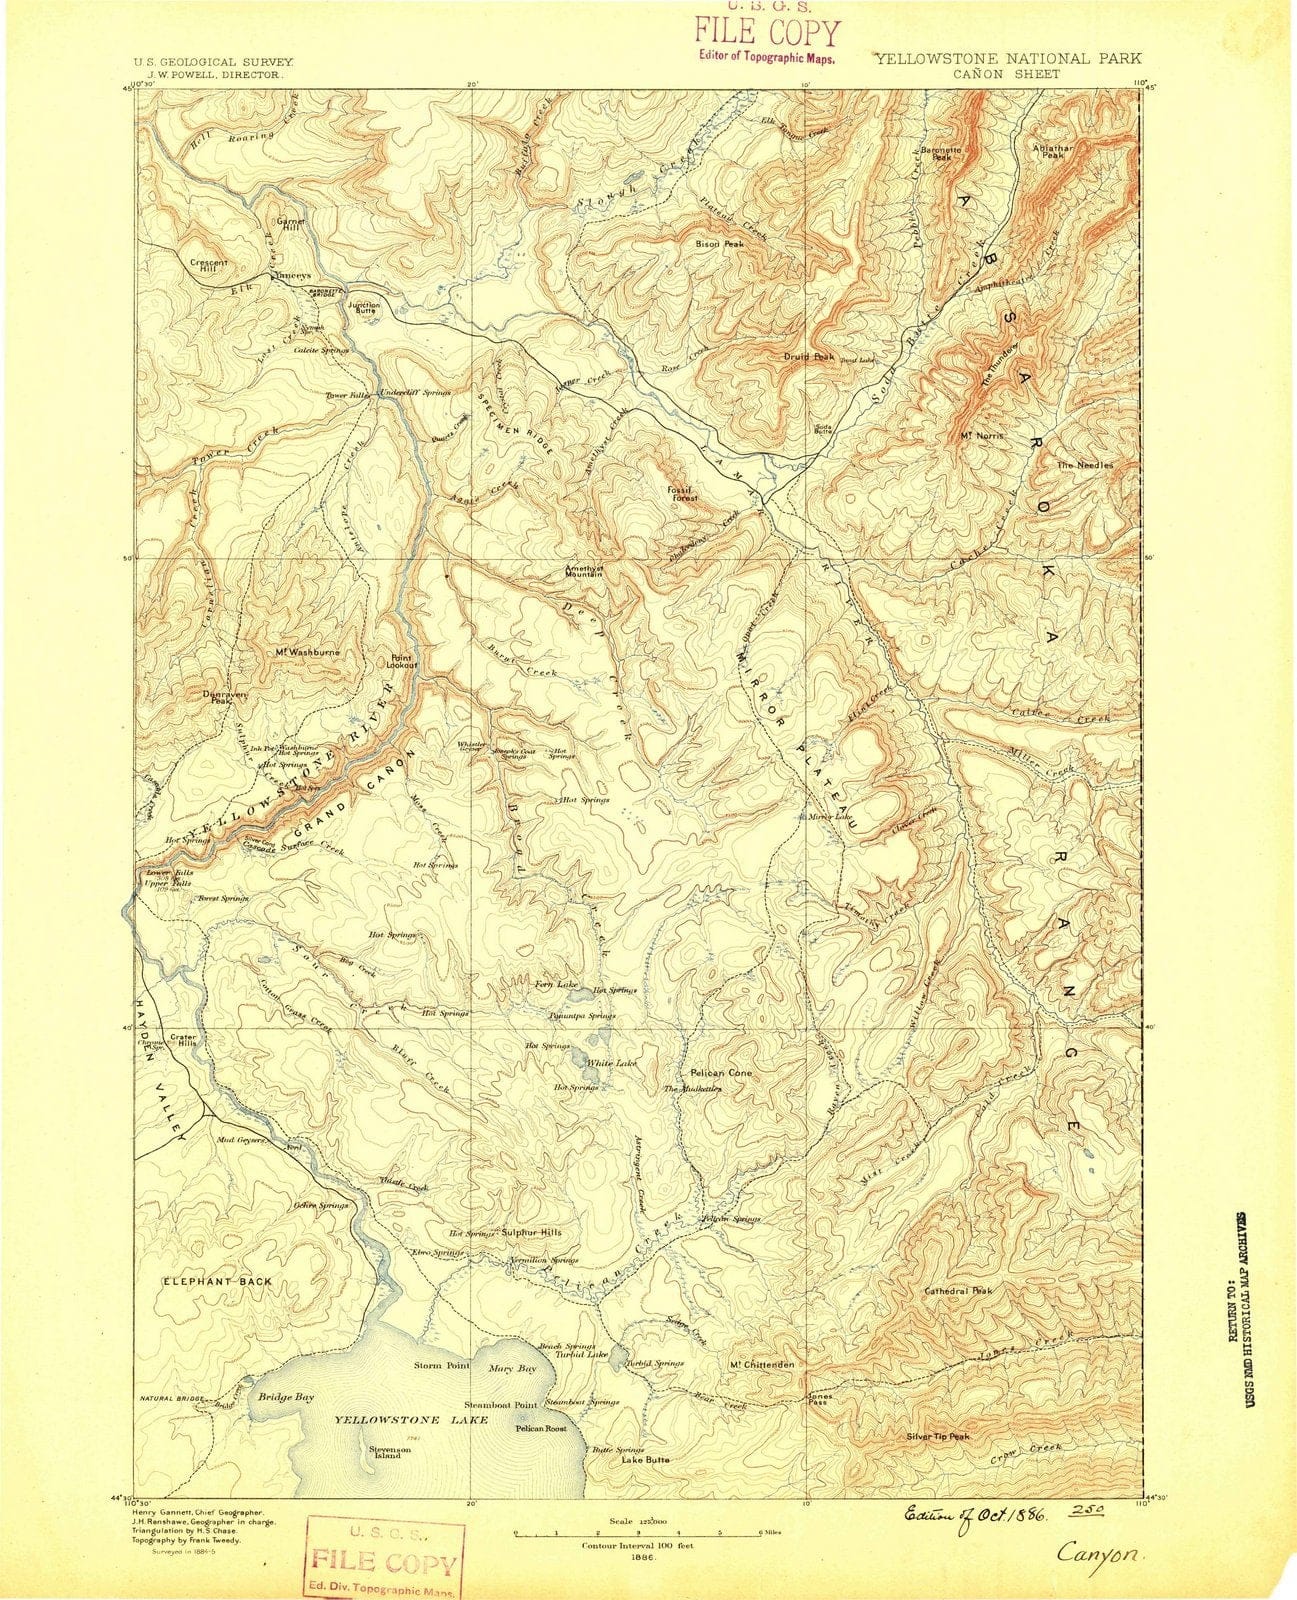 Best Quality - 1886 Canyon, WY - Wyoming - USGS Topographic Map